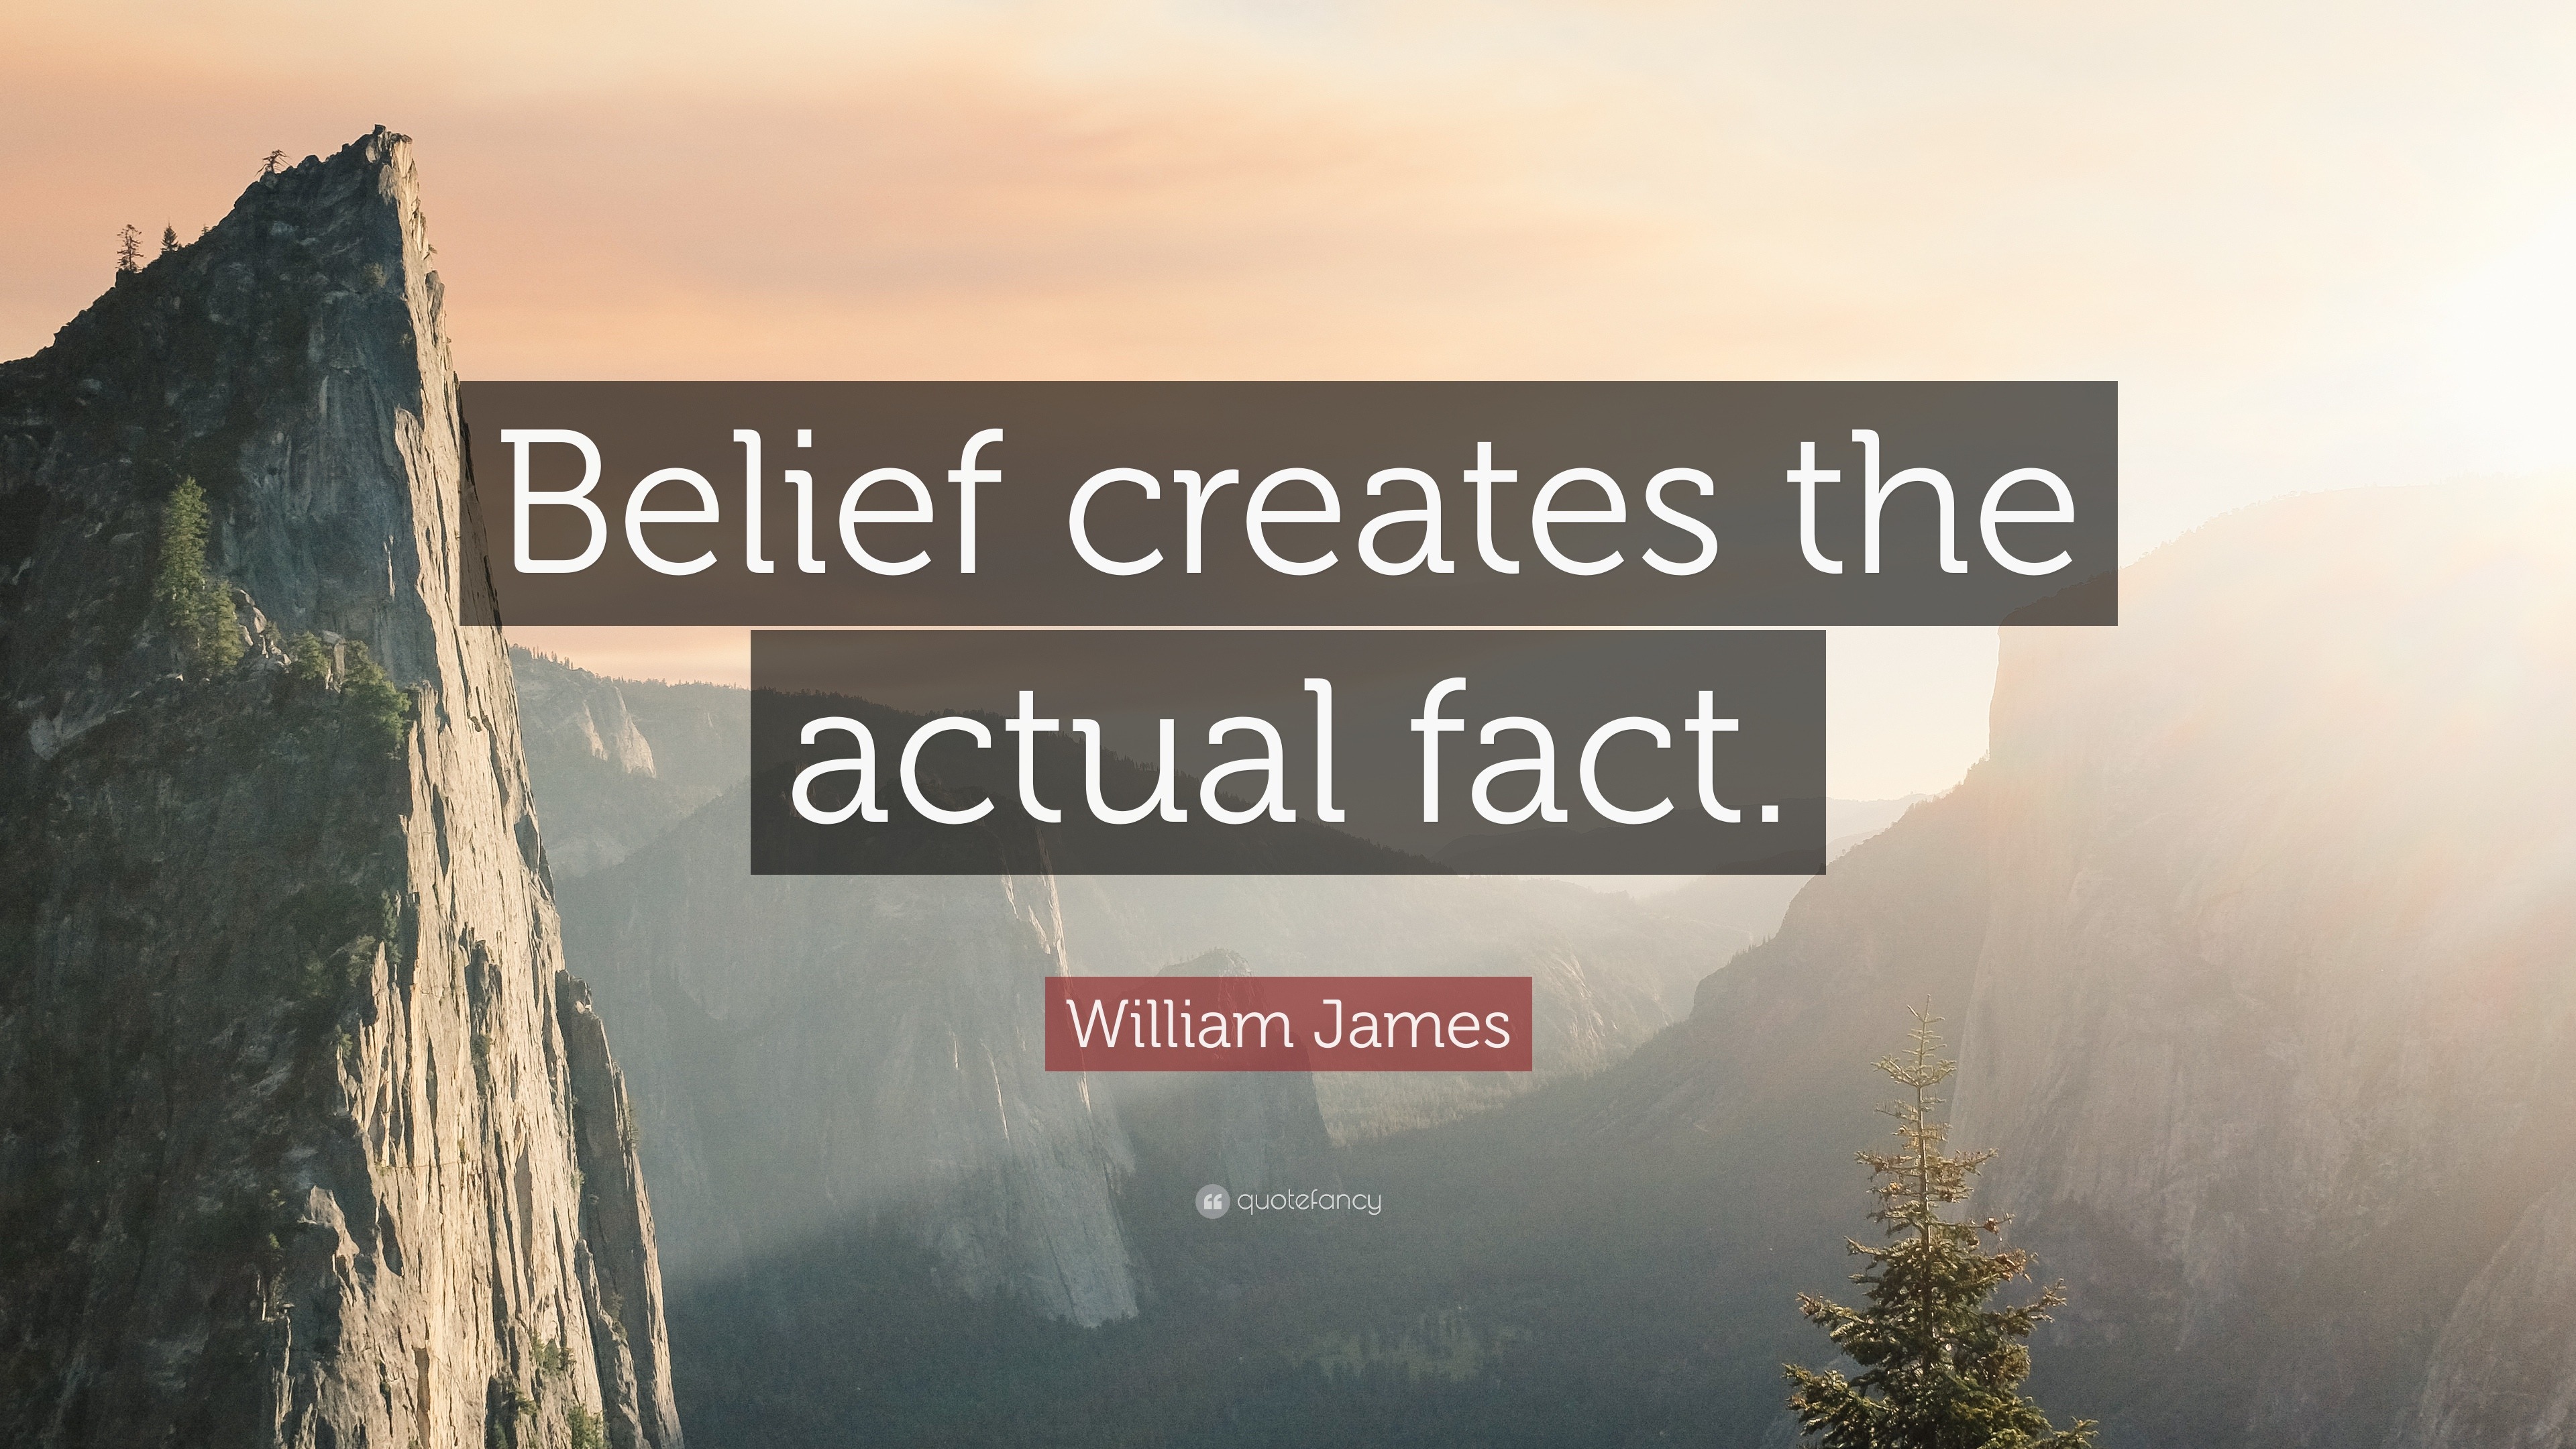 william james quotes�  Williams james, Strong quotes, Quotes